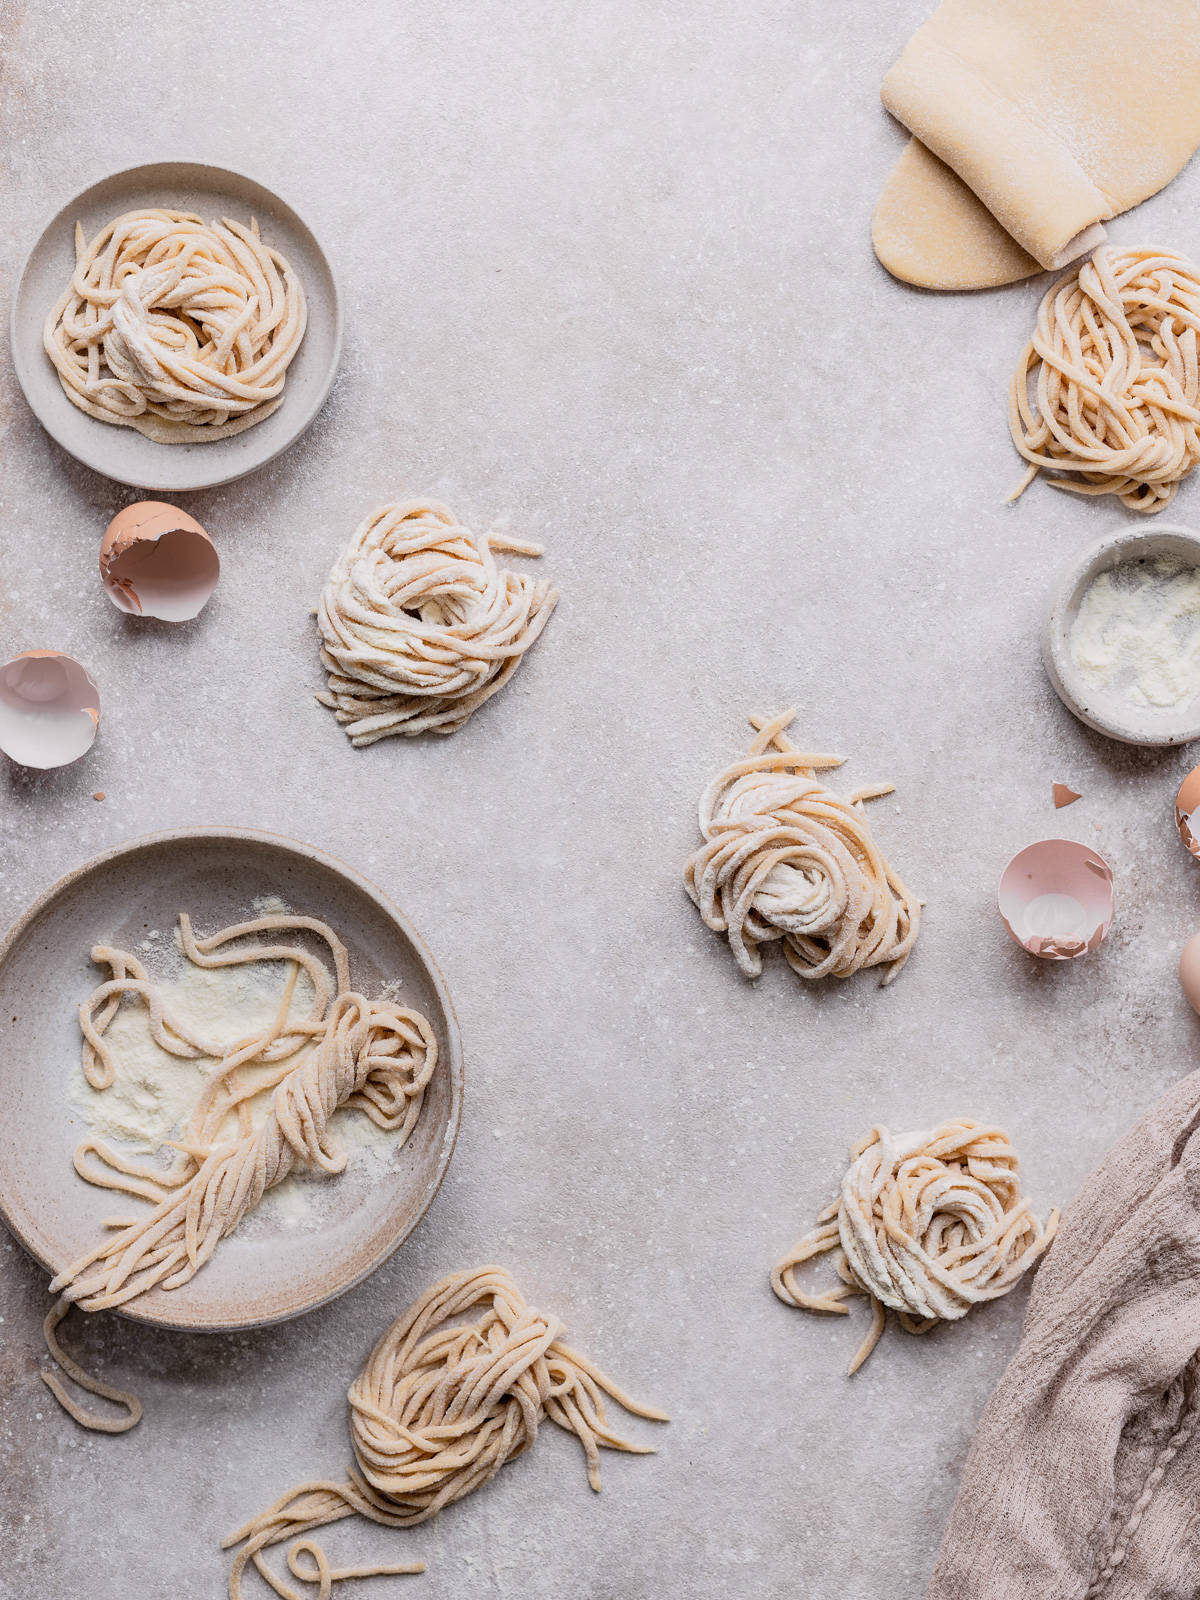 Some nest of tonnarelli pasta on a backdrop and in a bowl with some semolina flour with some eggs shells around